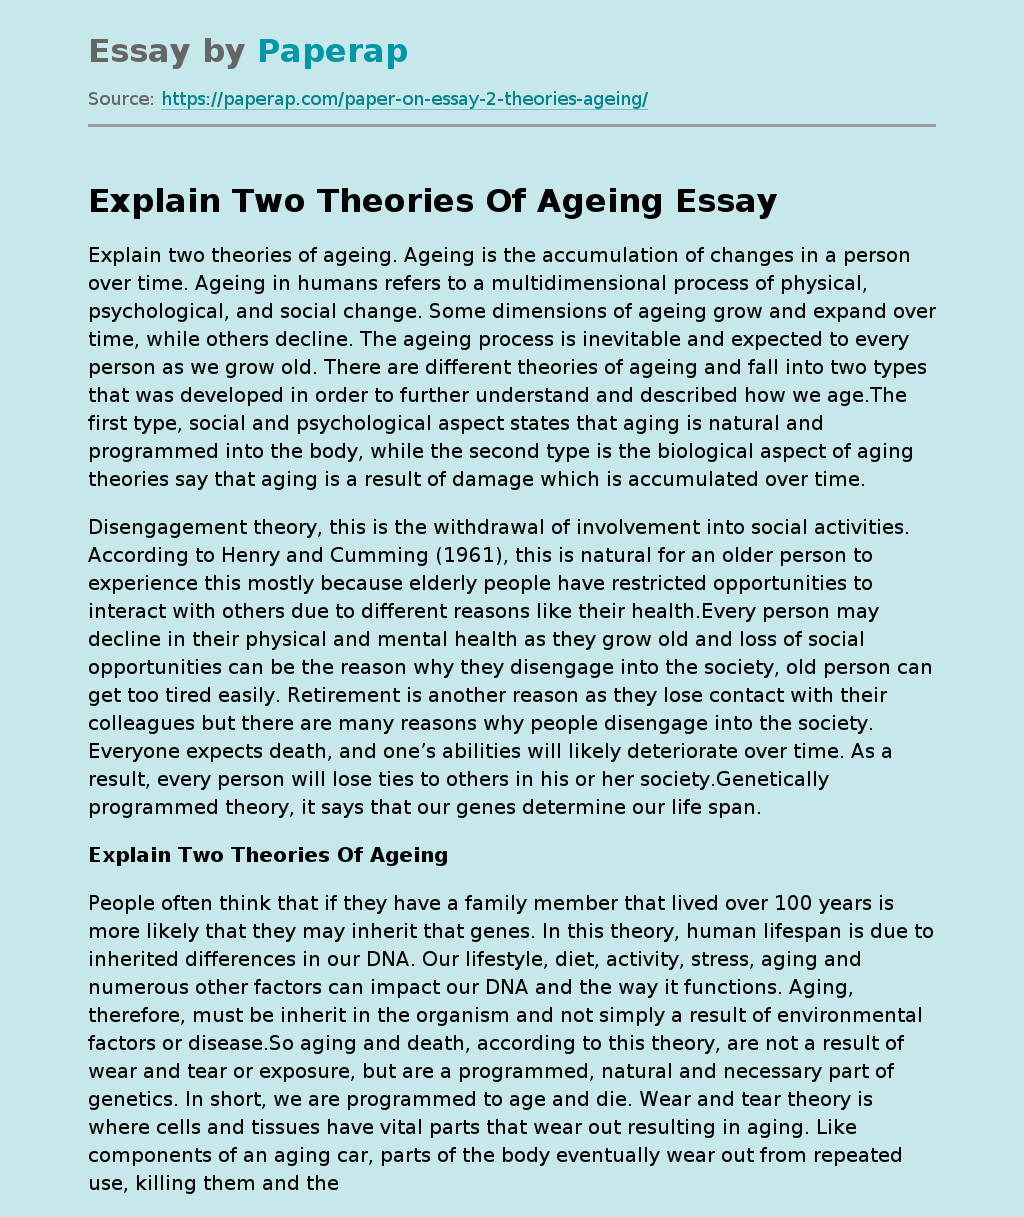 Explain Two Theories Of Ageing